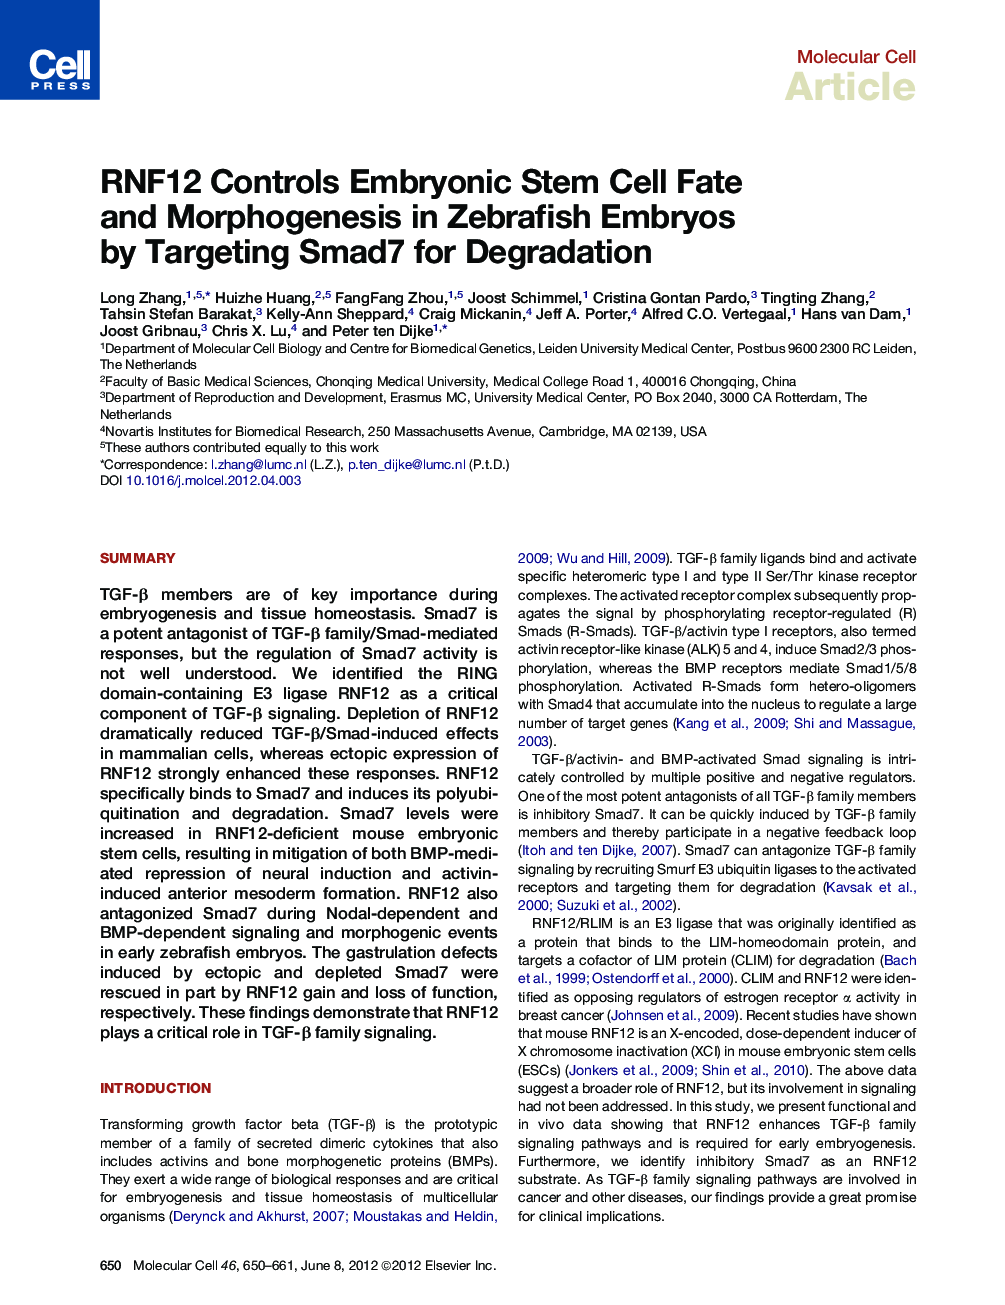 RNF12 Controls Embryonic Stem Cell Fate and Morphogenesis in Zebrafish Embryos by Targeting Smad7 for Degradation